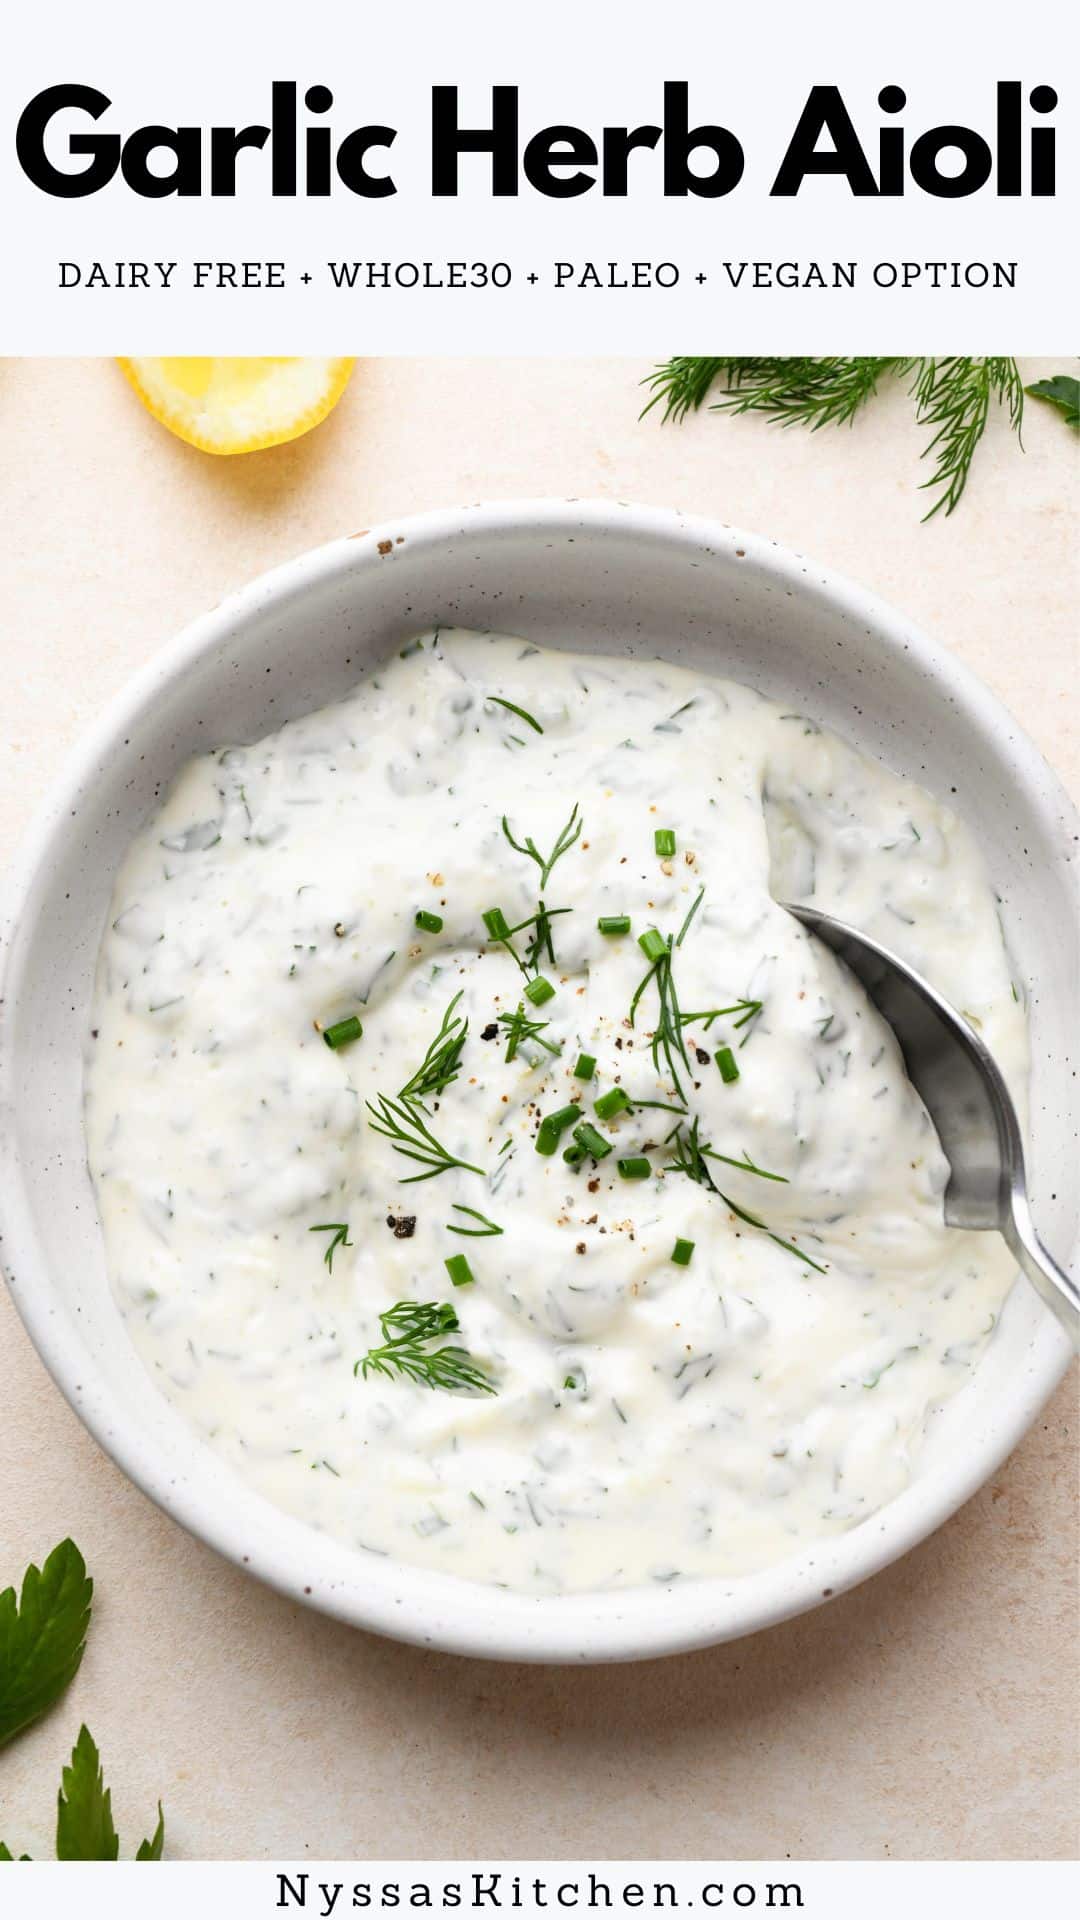 Garlic herb aioli is the perfect easy dipping sauce that only takes minutes to mix up! Made with avocado oil mayonnaise, tons of fresh herbs, garlic, and lemon juice. It's dairy free, super creamy, and the perfect sauce to serve with chicken, roasted potatoes or vegetables, artichokes, or as a dipping sauce for french fries. Whole30, Paleo, low carb, keto friendly, and vegan option.